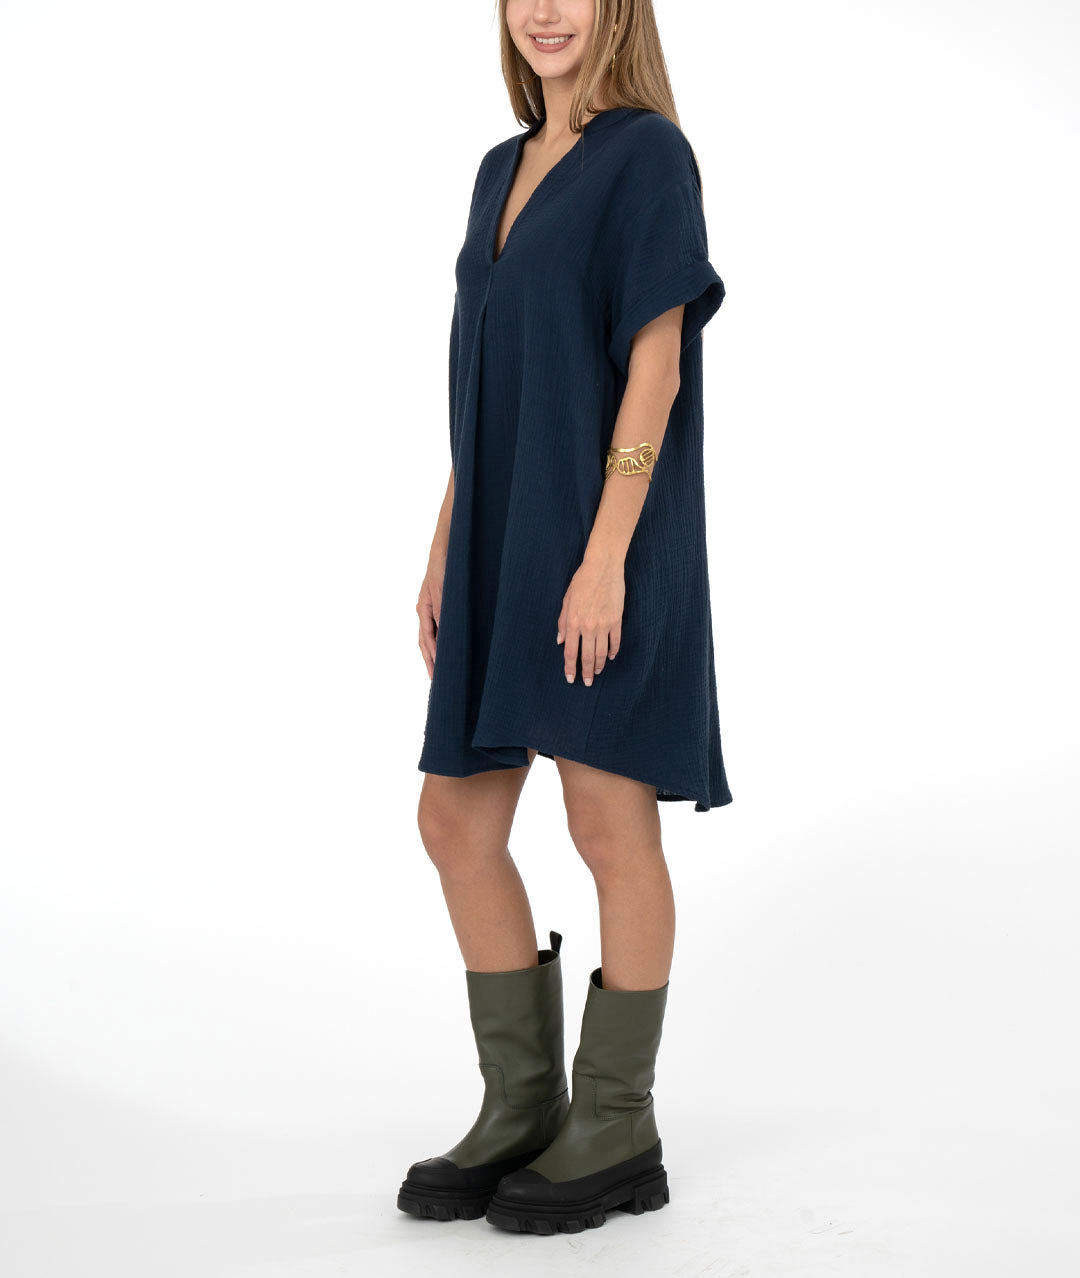 model in a navy blue pullover dress with a short cuffed sleeve, vneck, and pockets set in the side seams